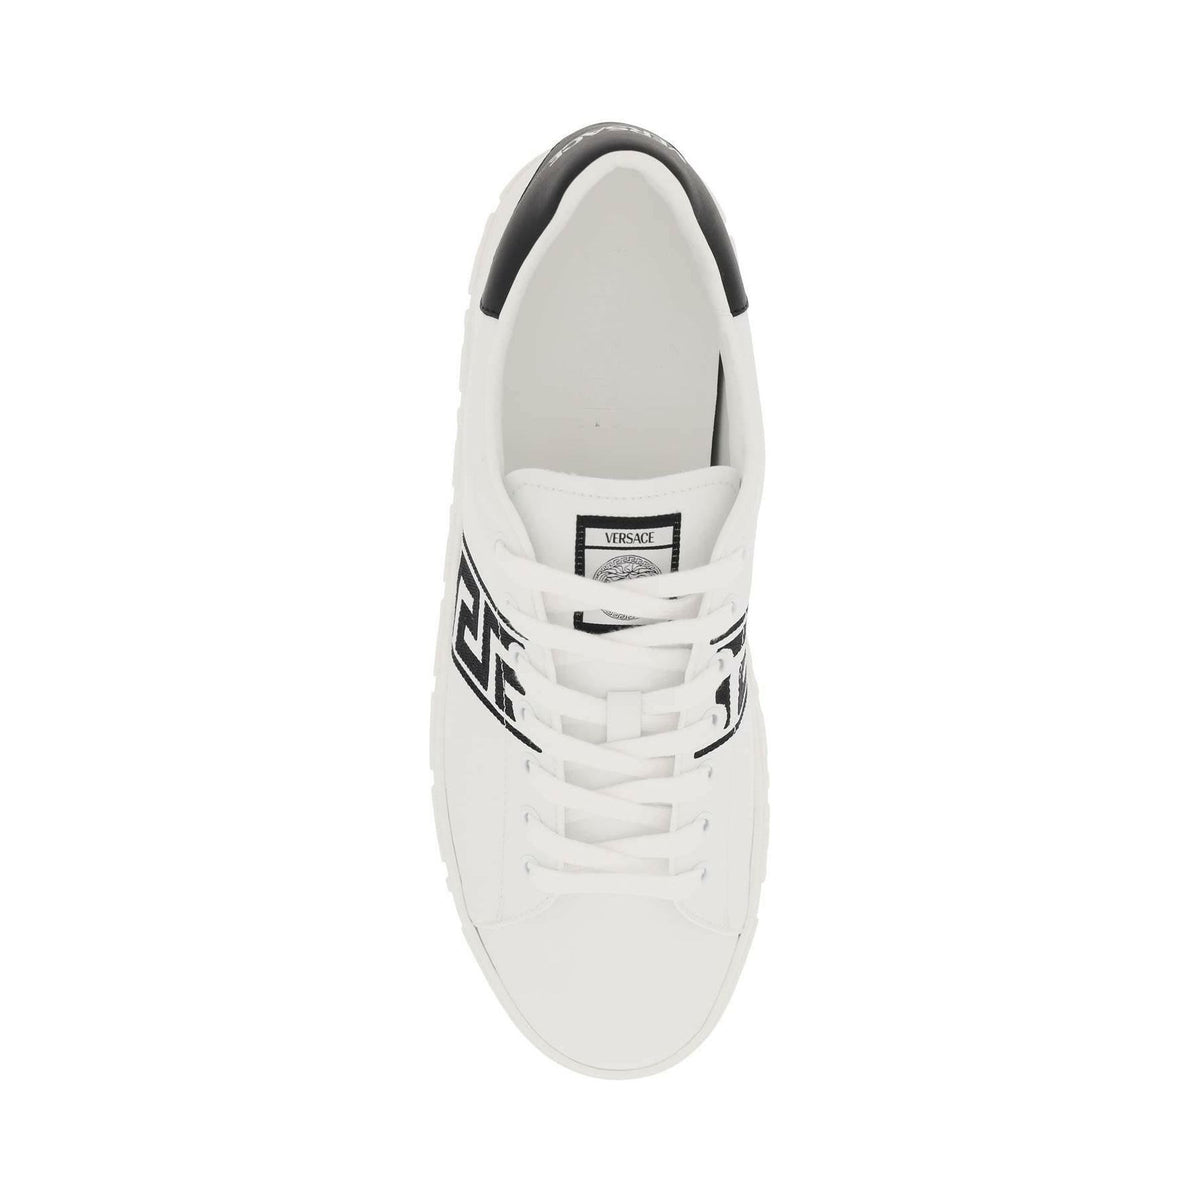 White Black Greca Sneakers With Contrasting Embroidered Motif VERSACE JOHN JULIA.